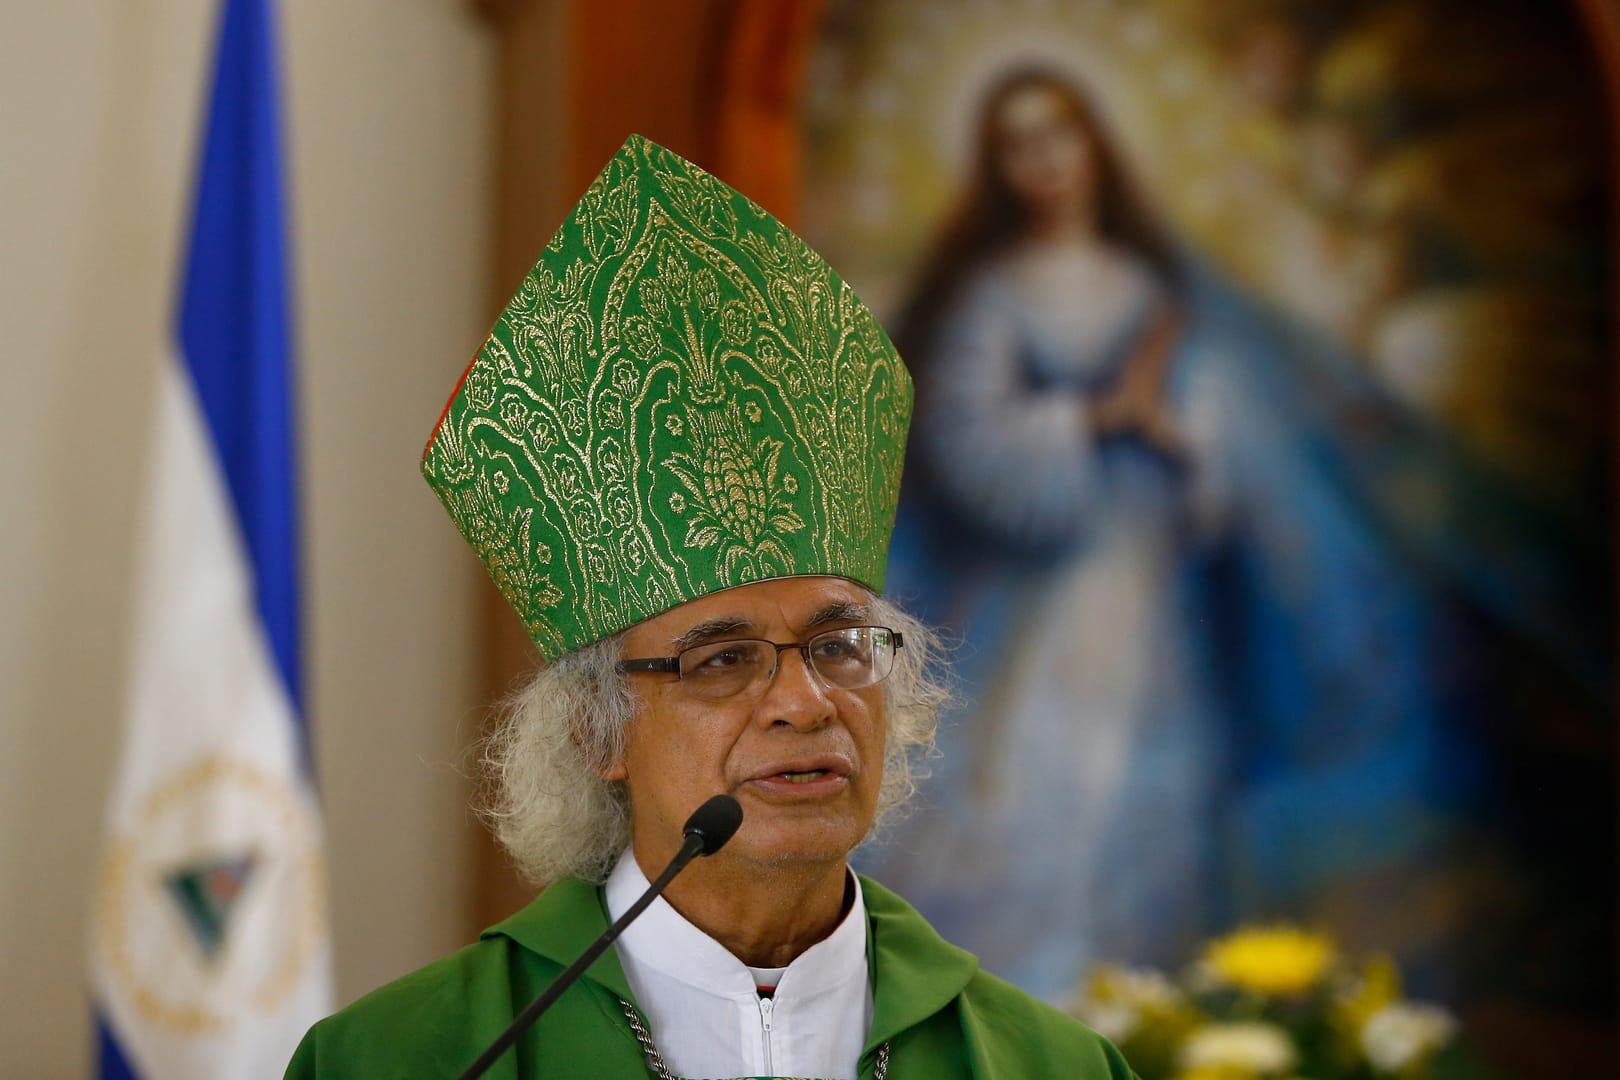 Nicaraguan cardinal says clergy ‘cannot remain silent’ about situation in country